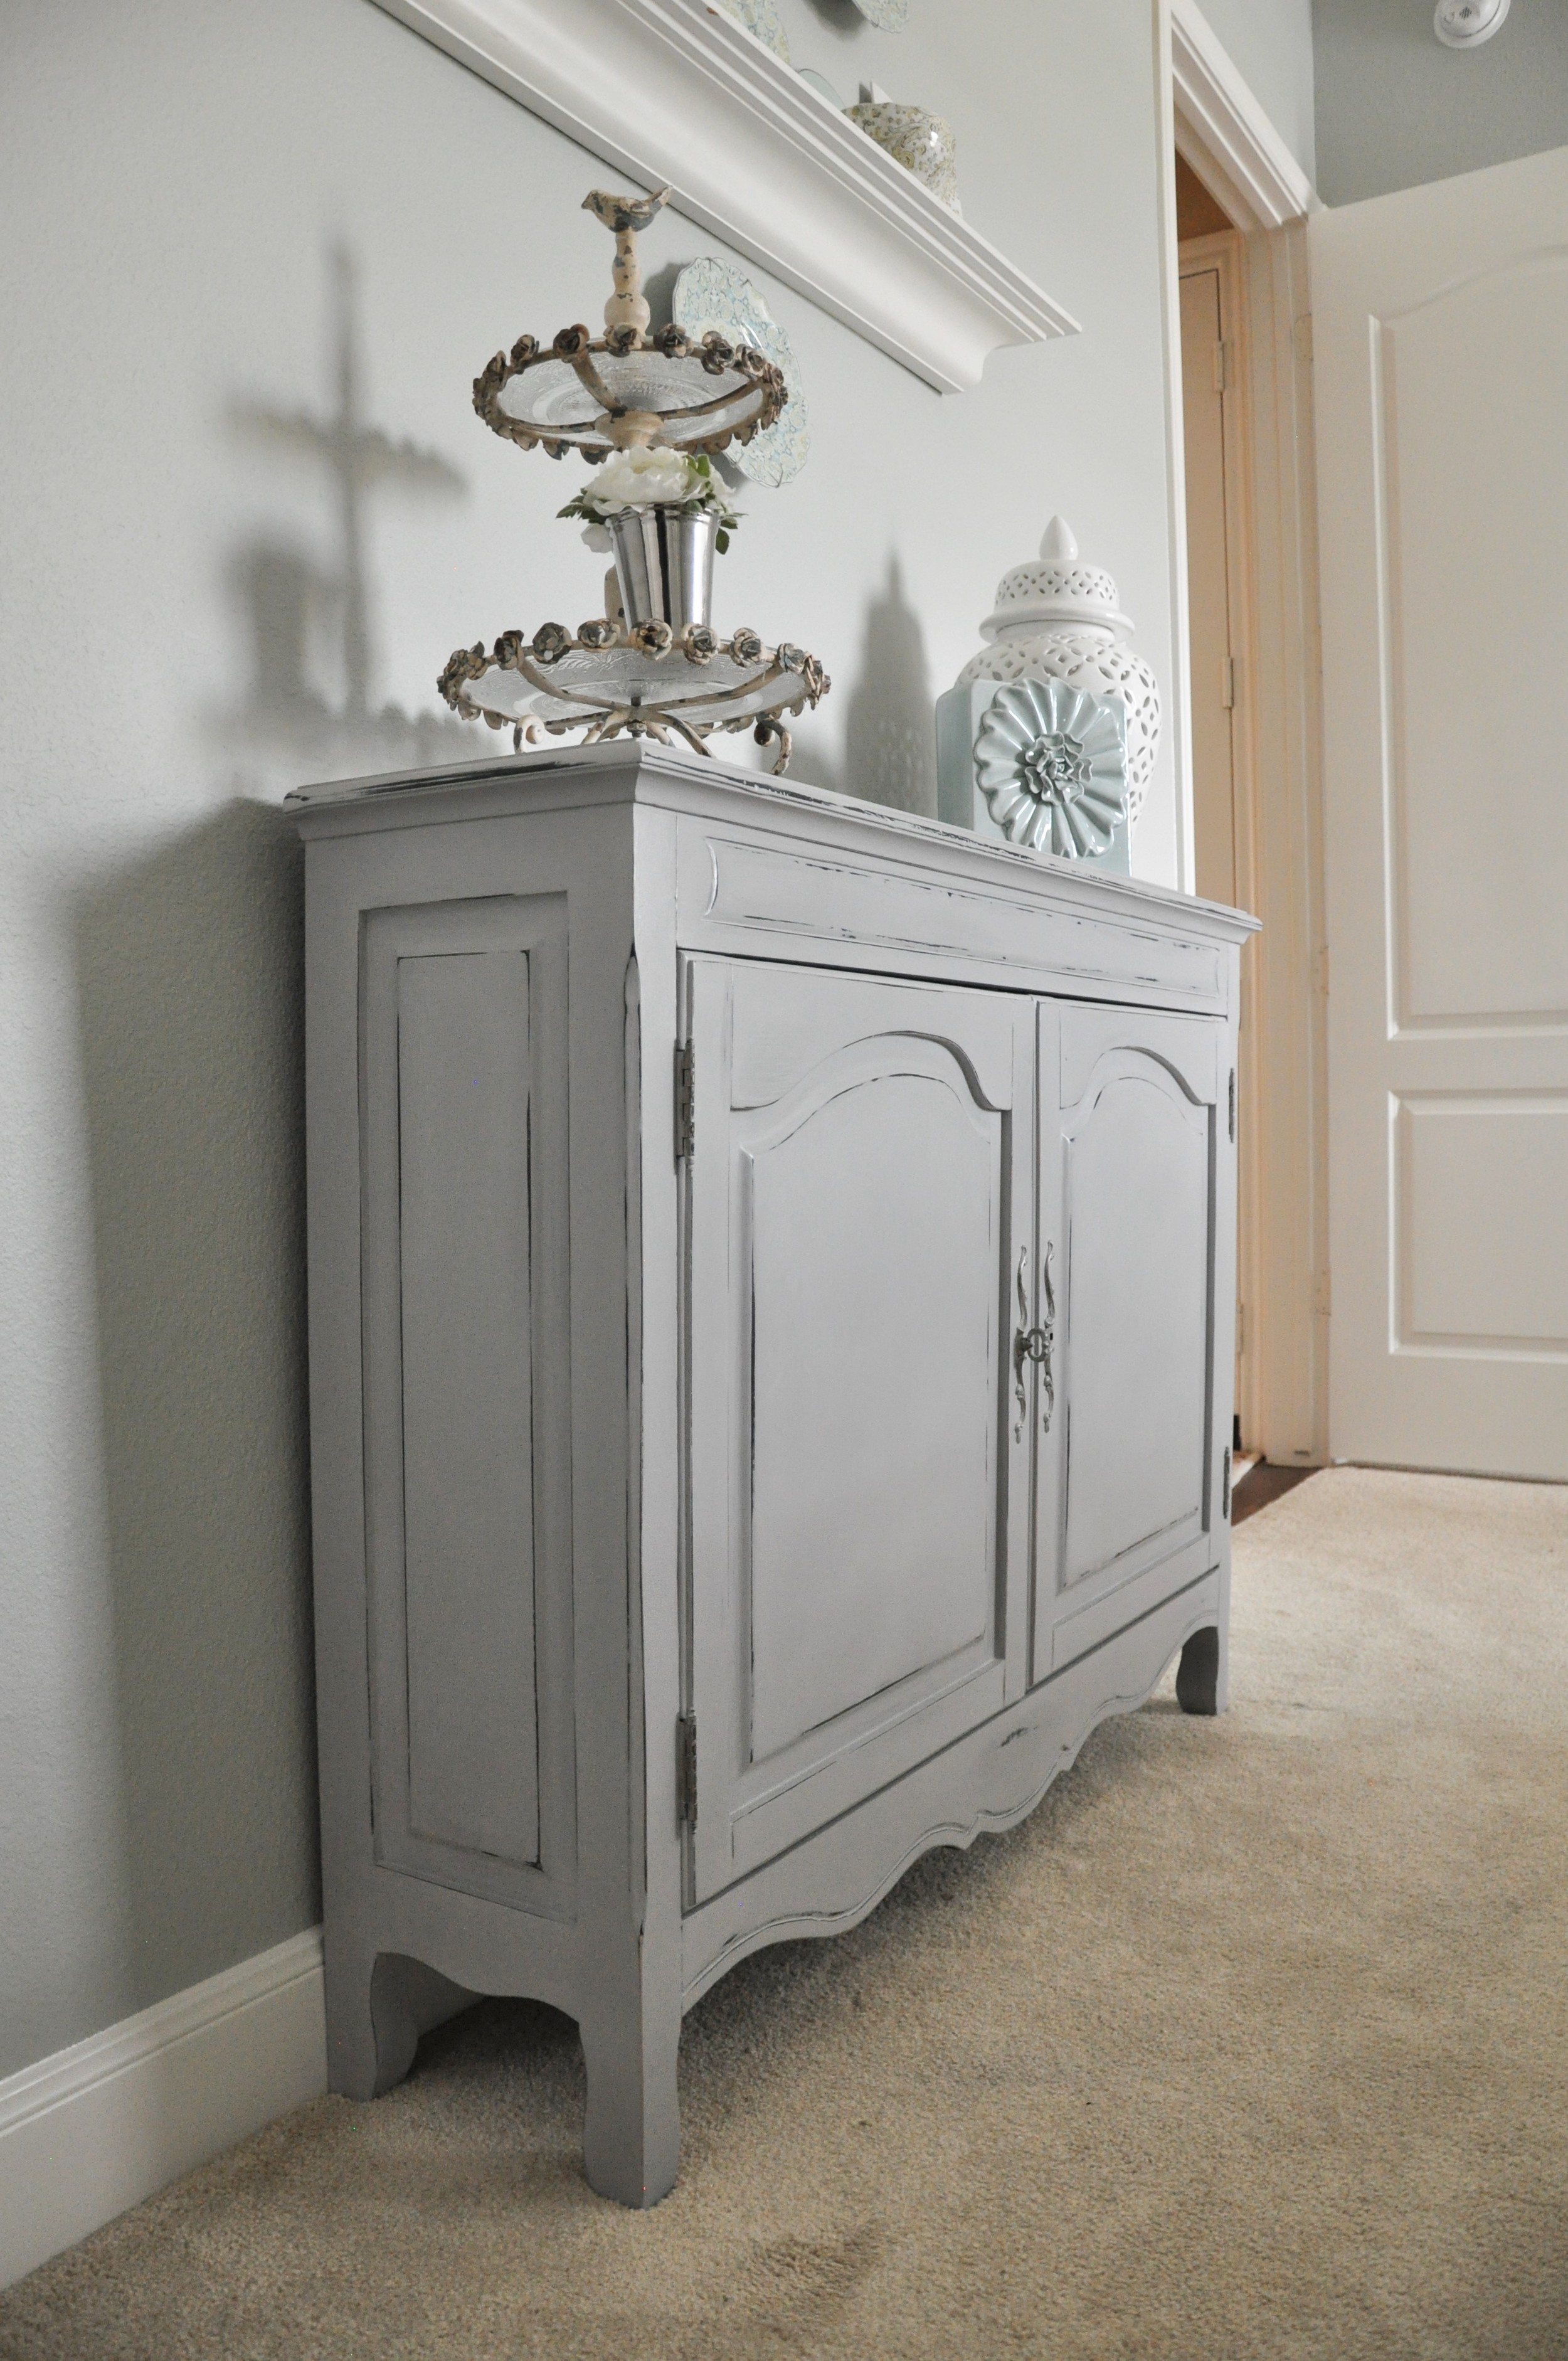 Sanding Chalk Paint® Before OR After Waxing?